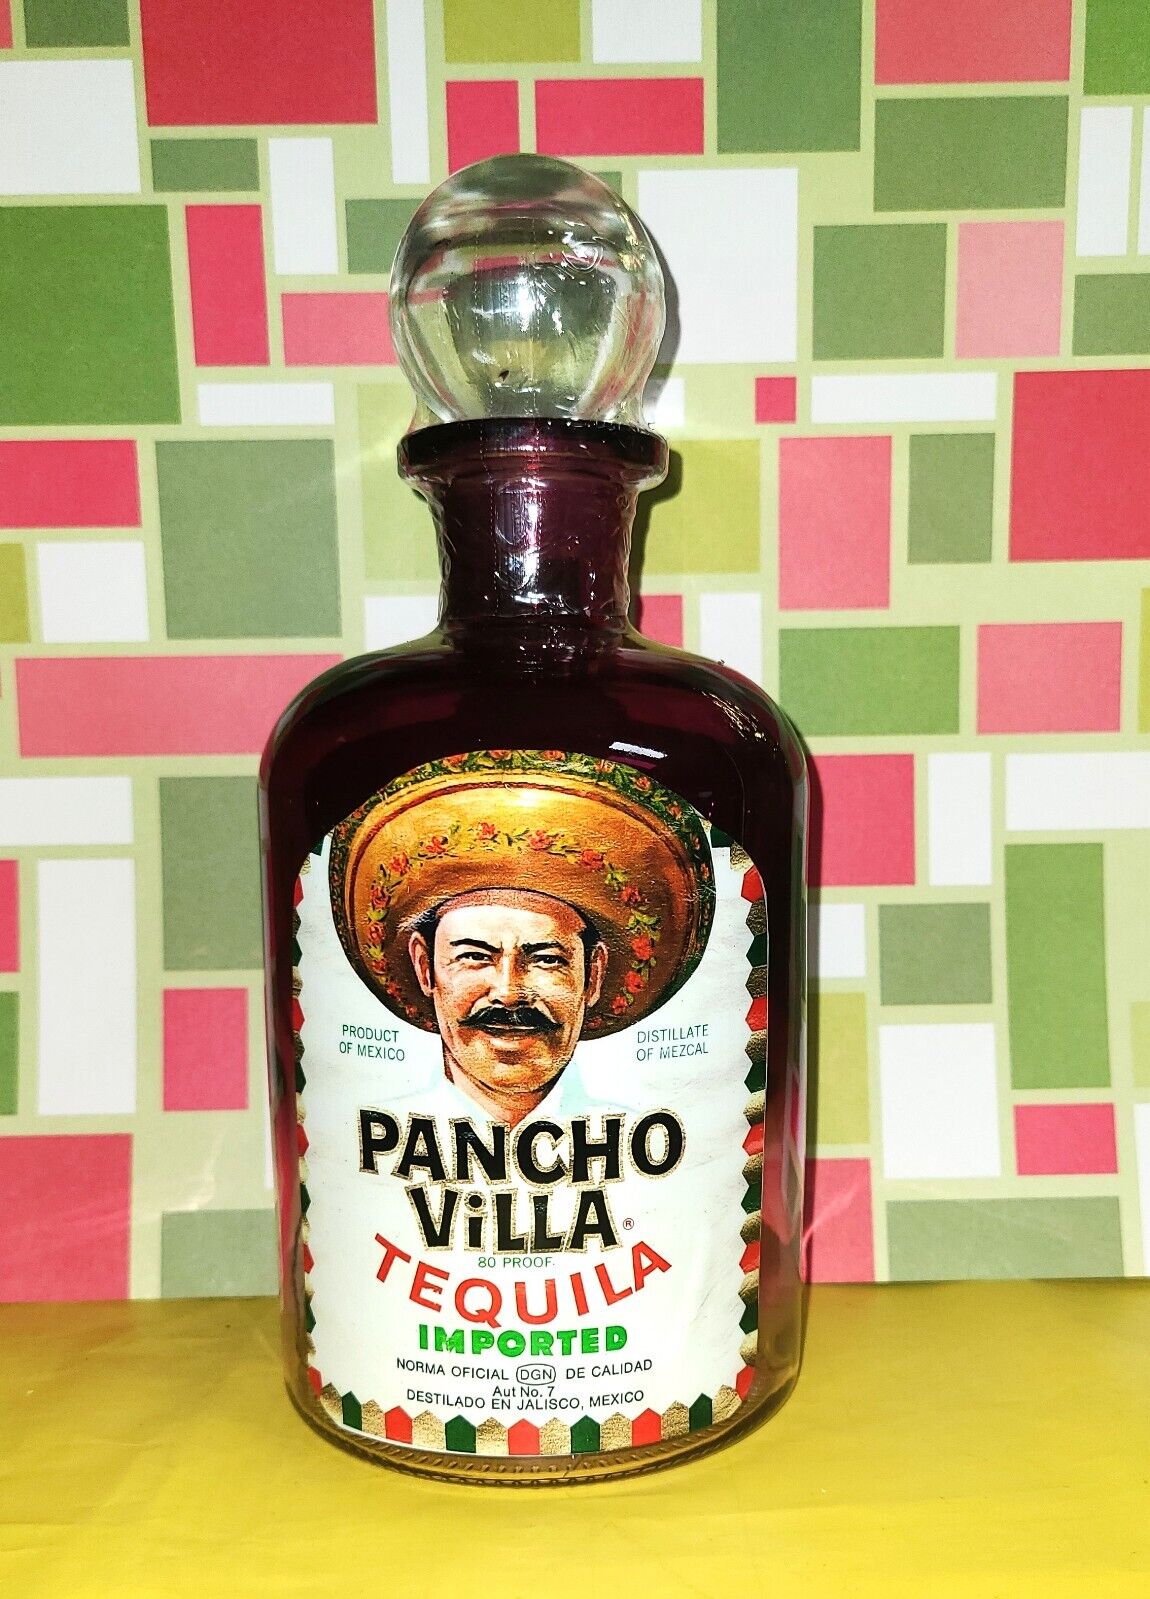 PANCHO VILLA TEQUILA  Label  Purple Glass Decanter bottle with stopper Pancho Villa Tequila